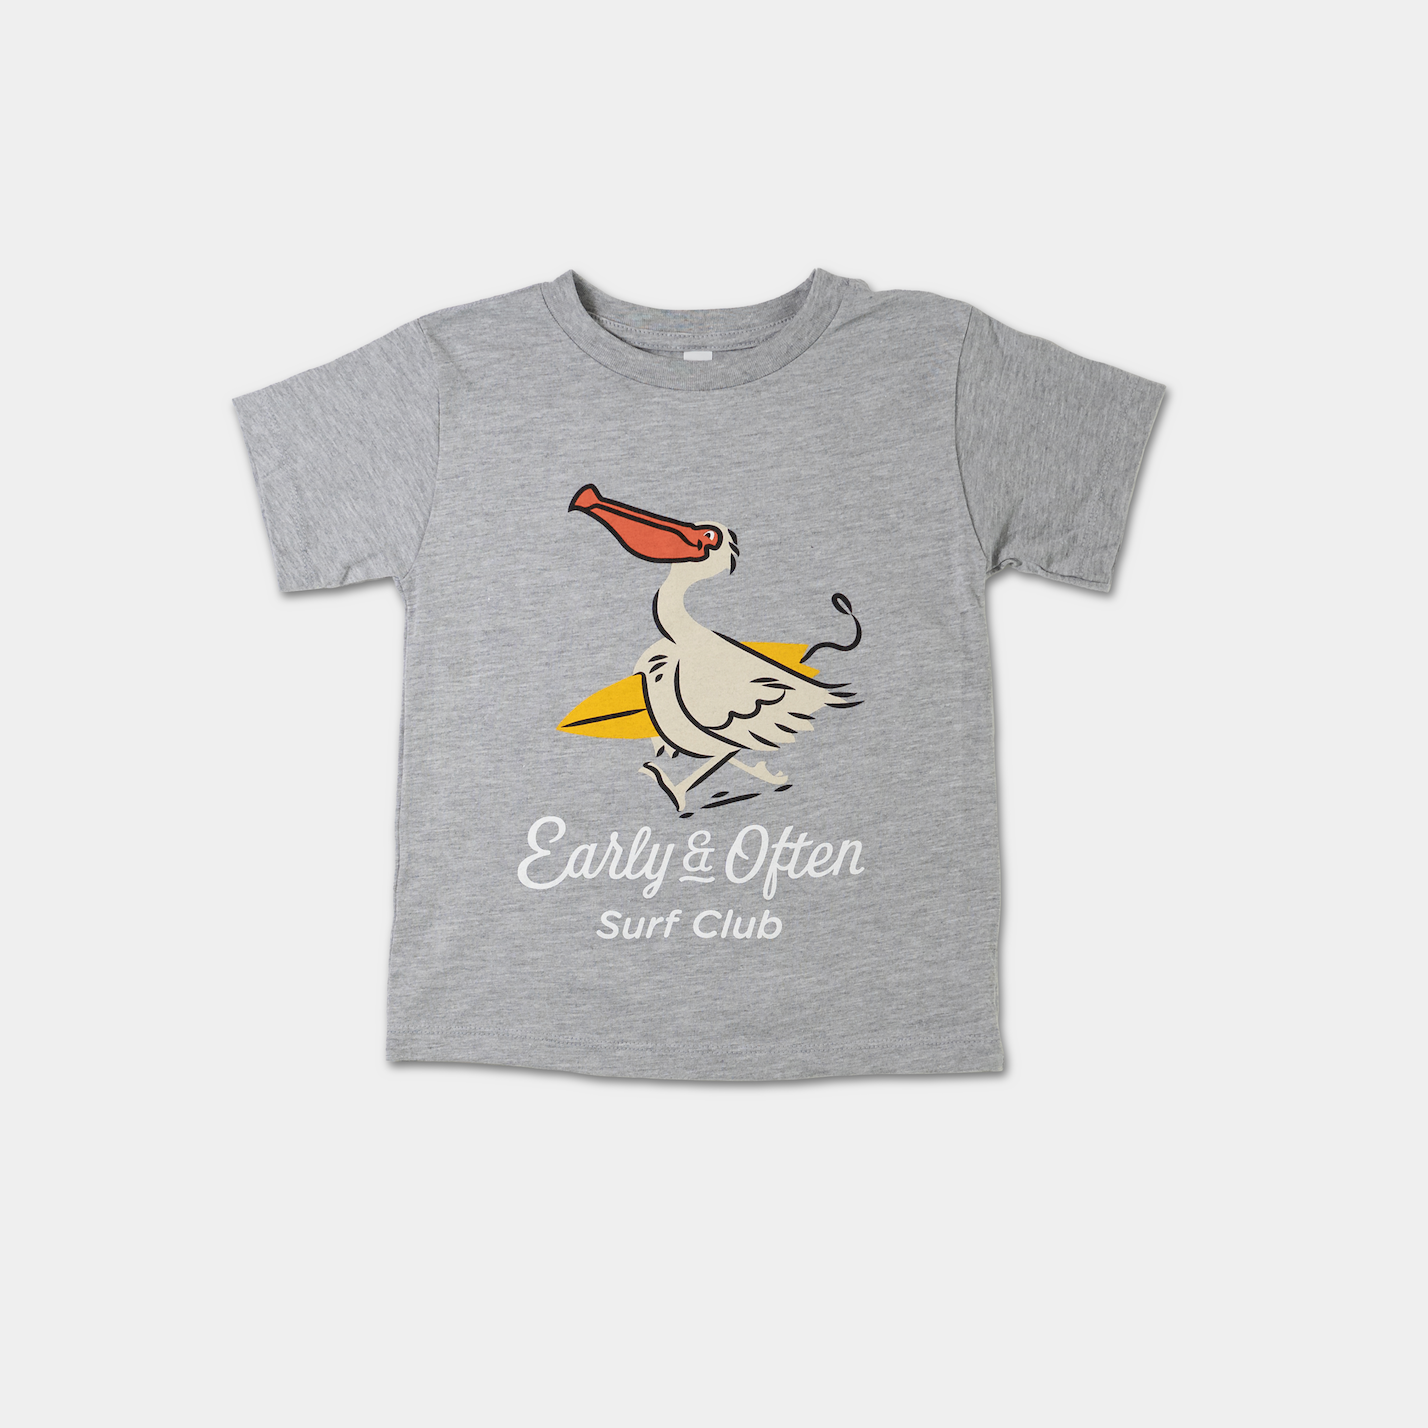 Kids' Early and Often Tee